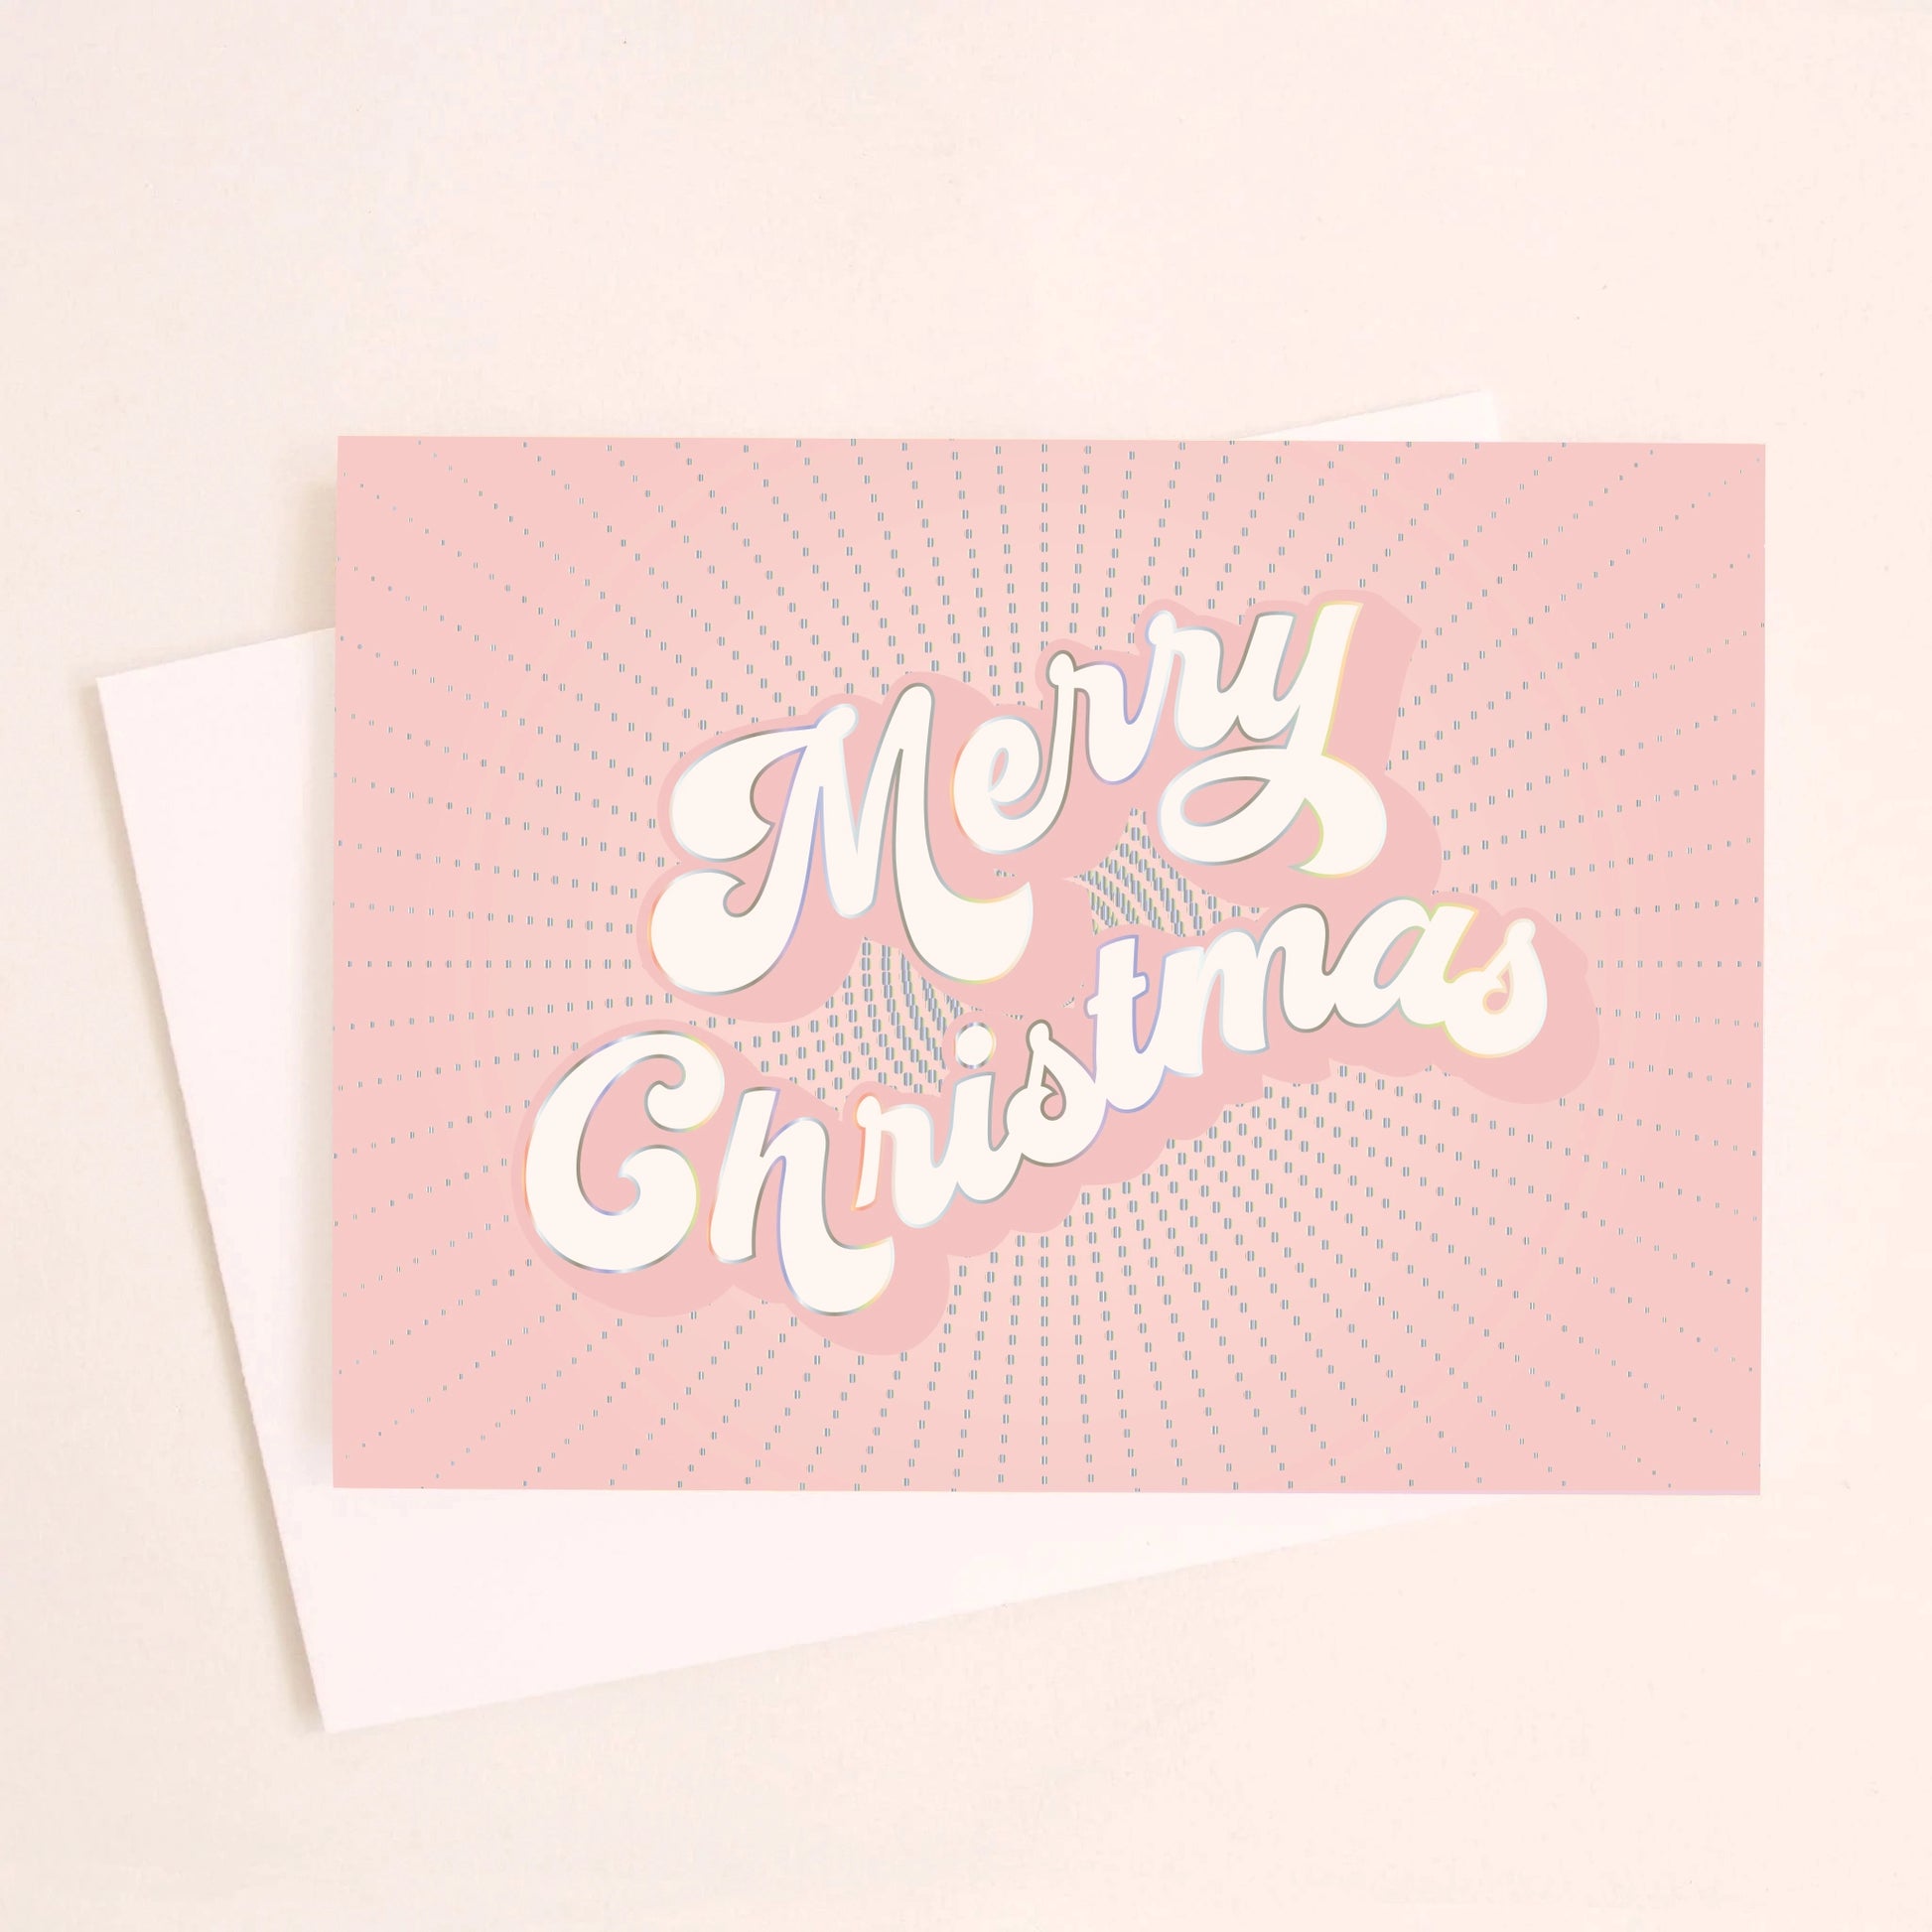 On a light pink background is a light pink greeting card with white text in the center that reads, "Merry Christmas" along with a white envelope. 